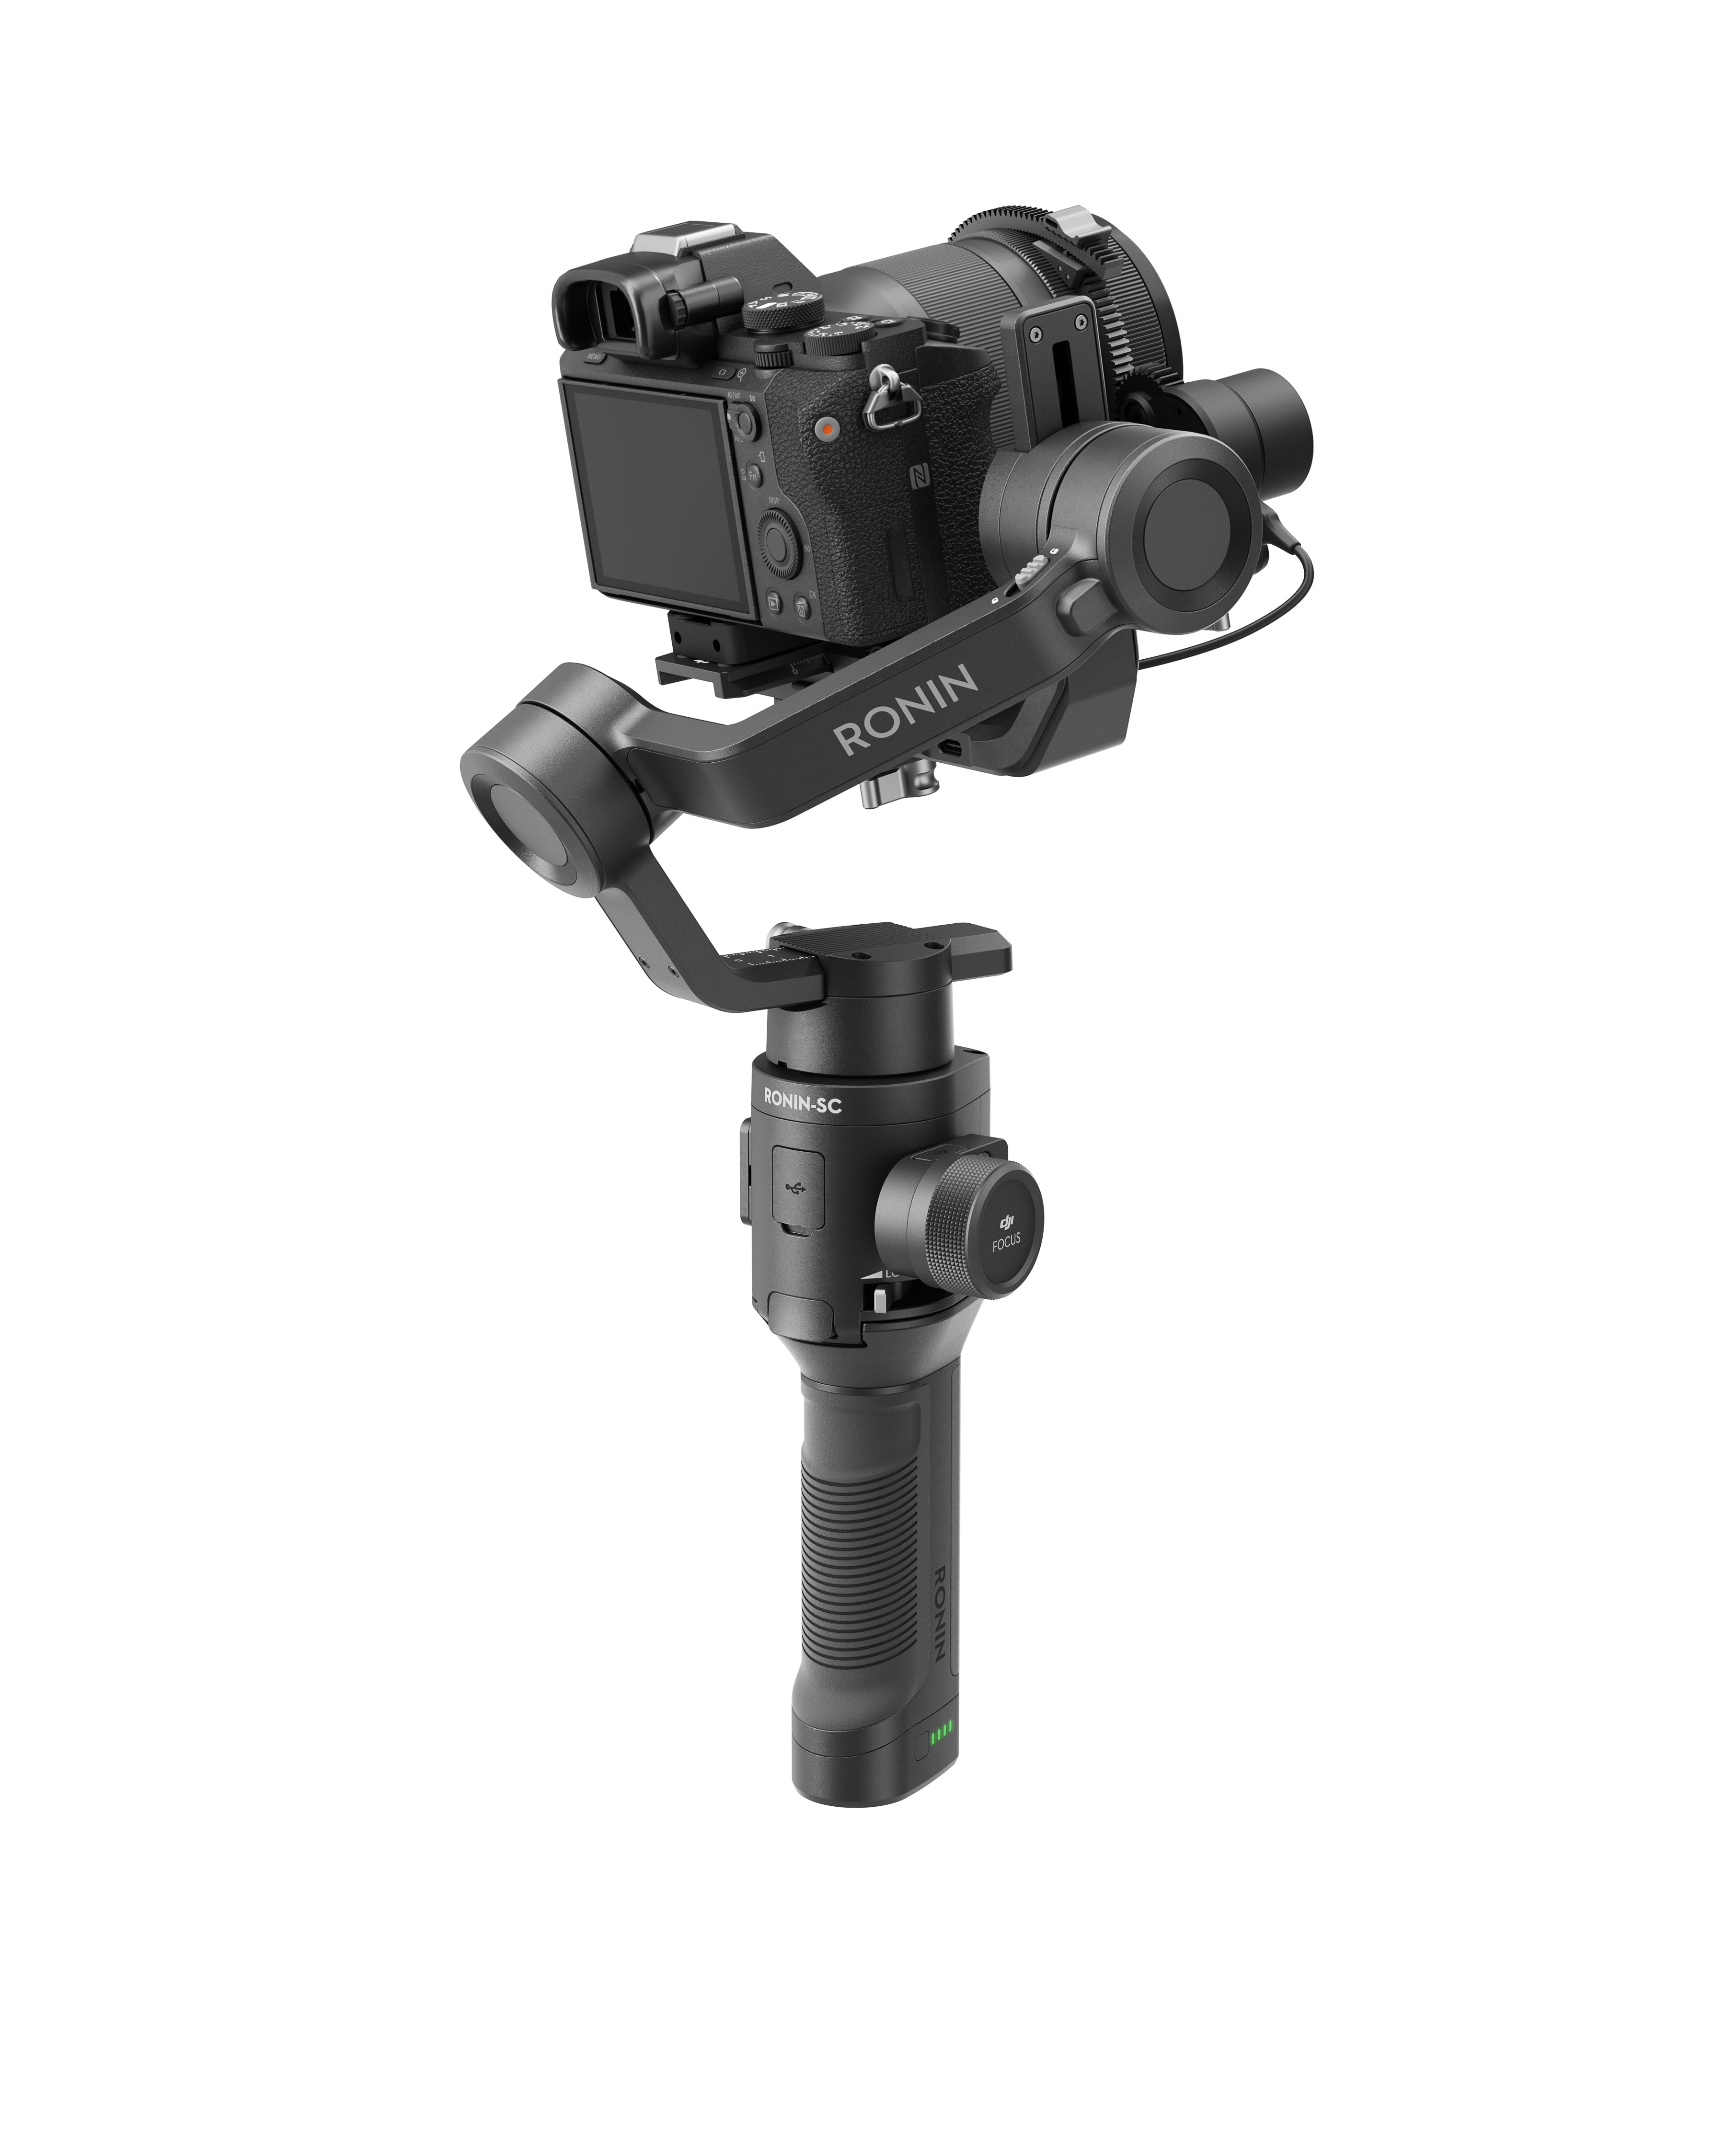 DJI Ronin-SC Lightweight Gimbal, 3-Axis Single-handed Stabilizer for  Mirrorless Cameras, Compatible with Sony, Nikon, Canon, Panasonic,  FUJIFILM, 